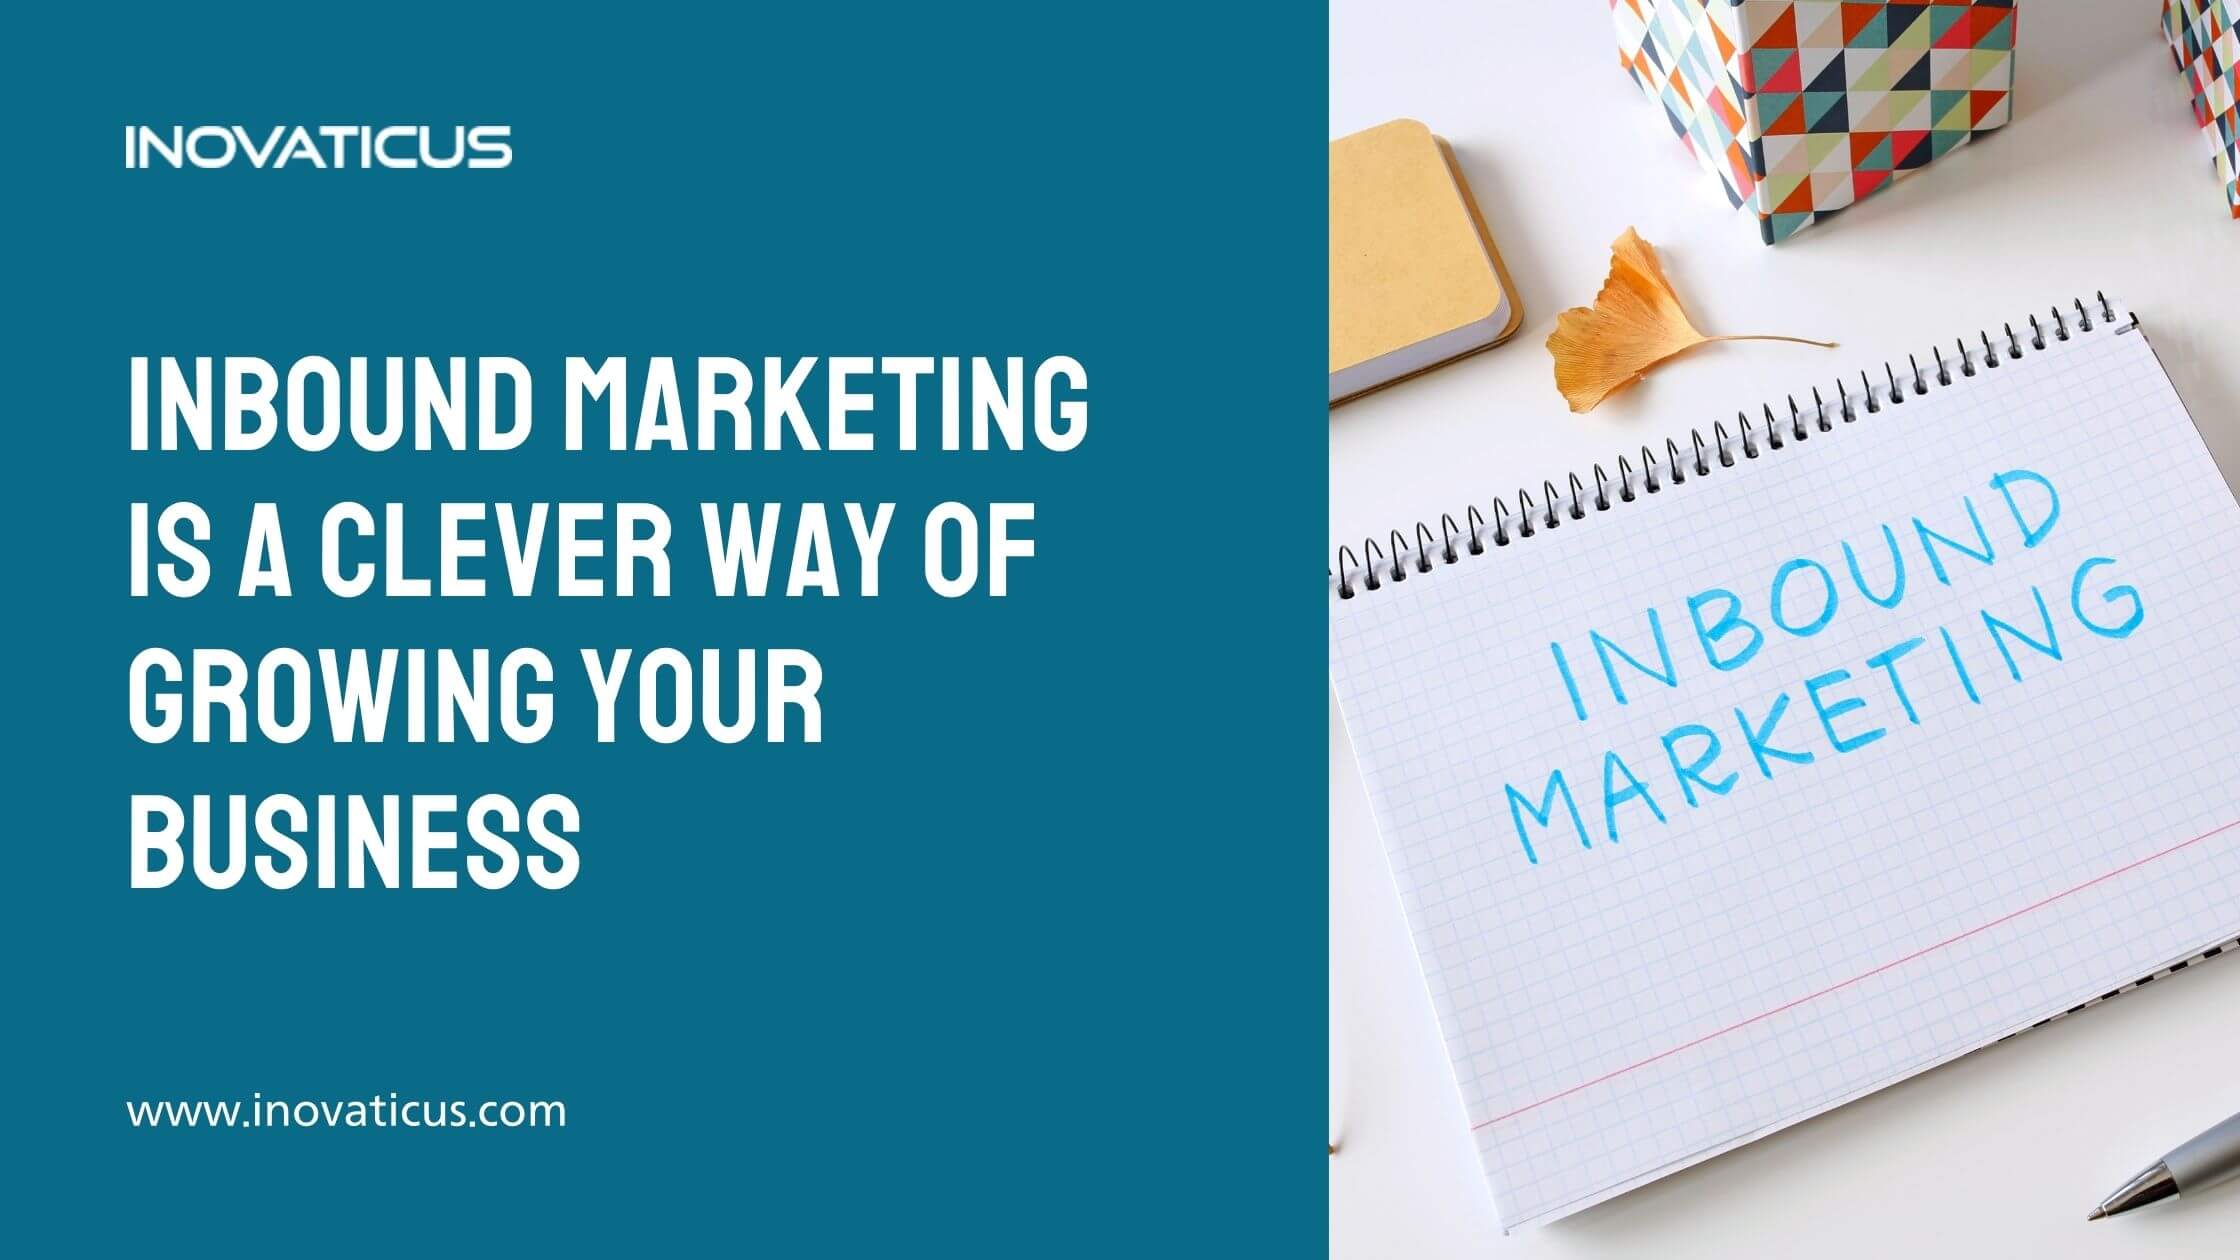 Inbound Marketing Is A Clever Way Of Growing Your Business